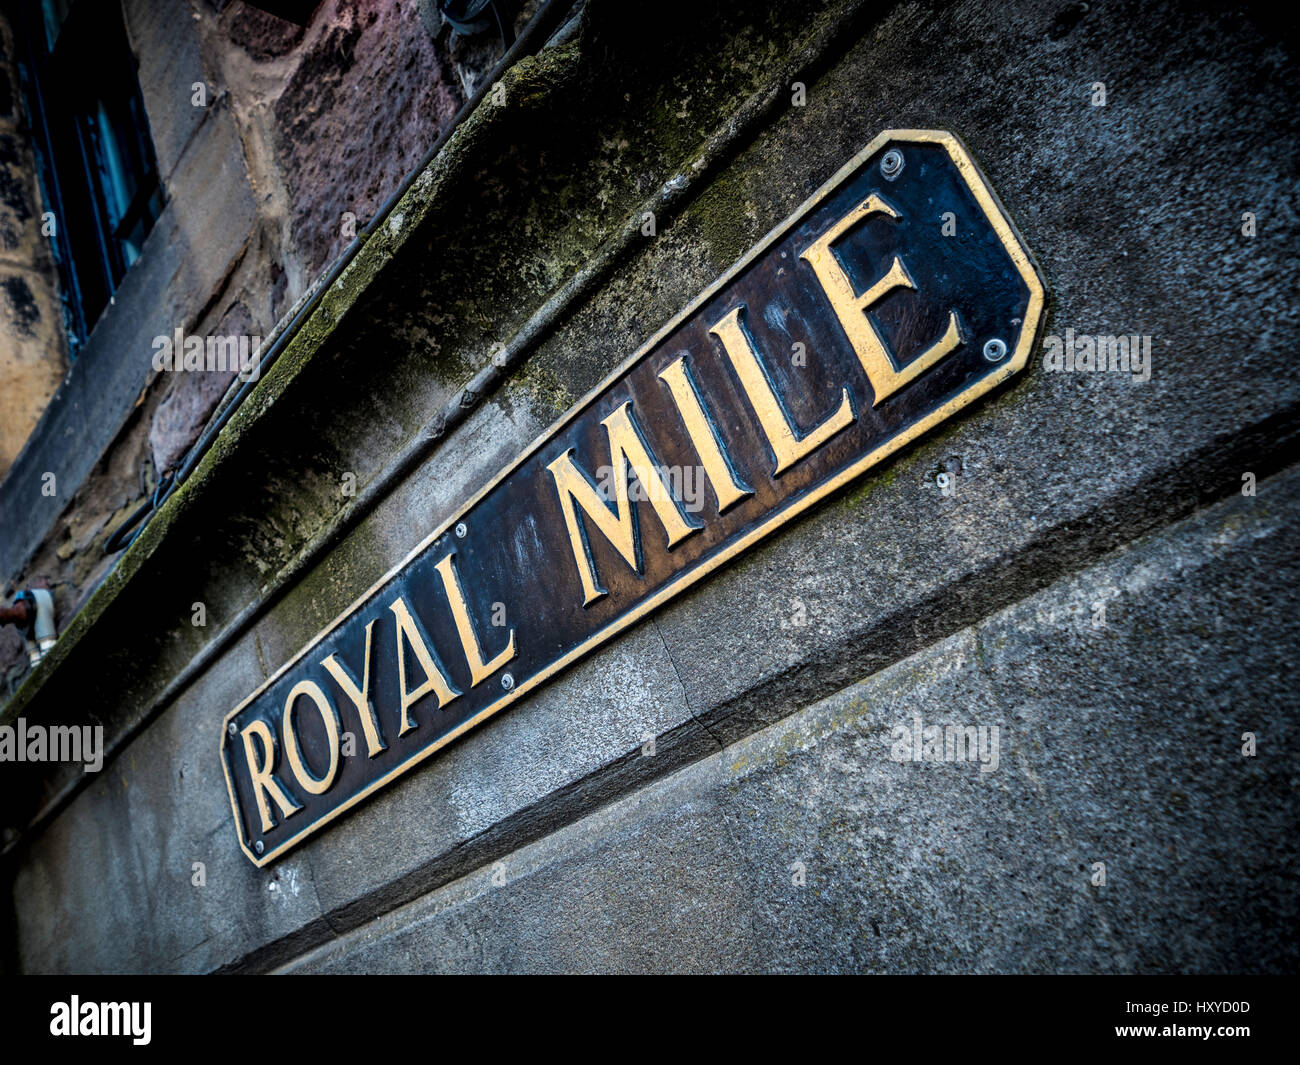 Closeup of a Royal Mile sign fixed to a pollution blackened building exterior walled. Edinburgh, Scotland. Stock Photo